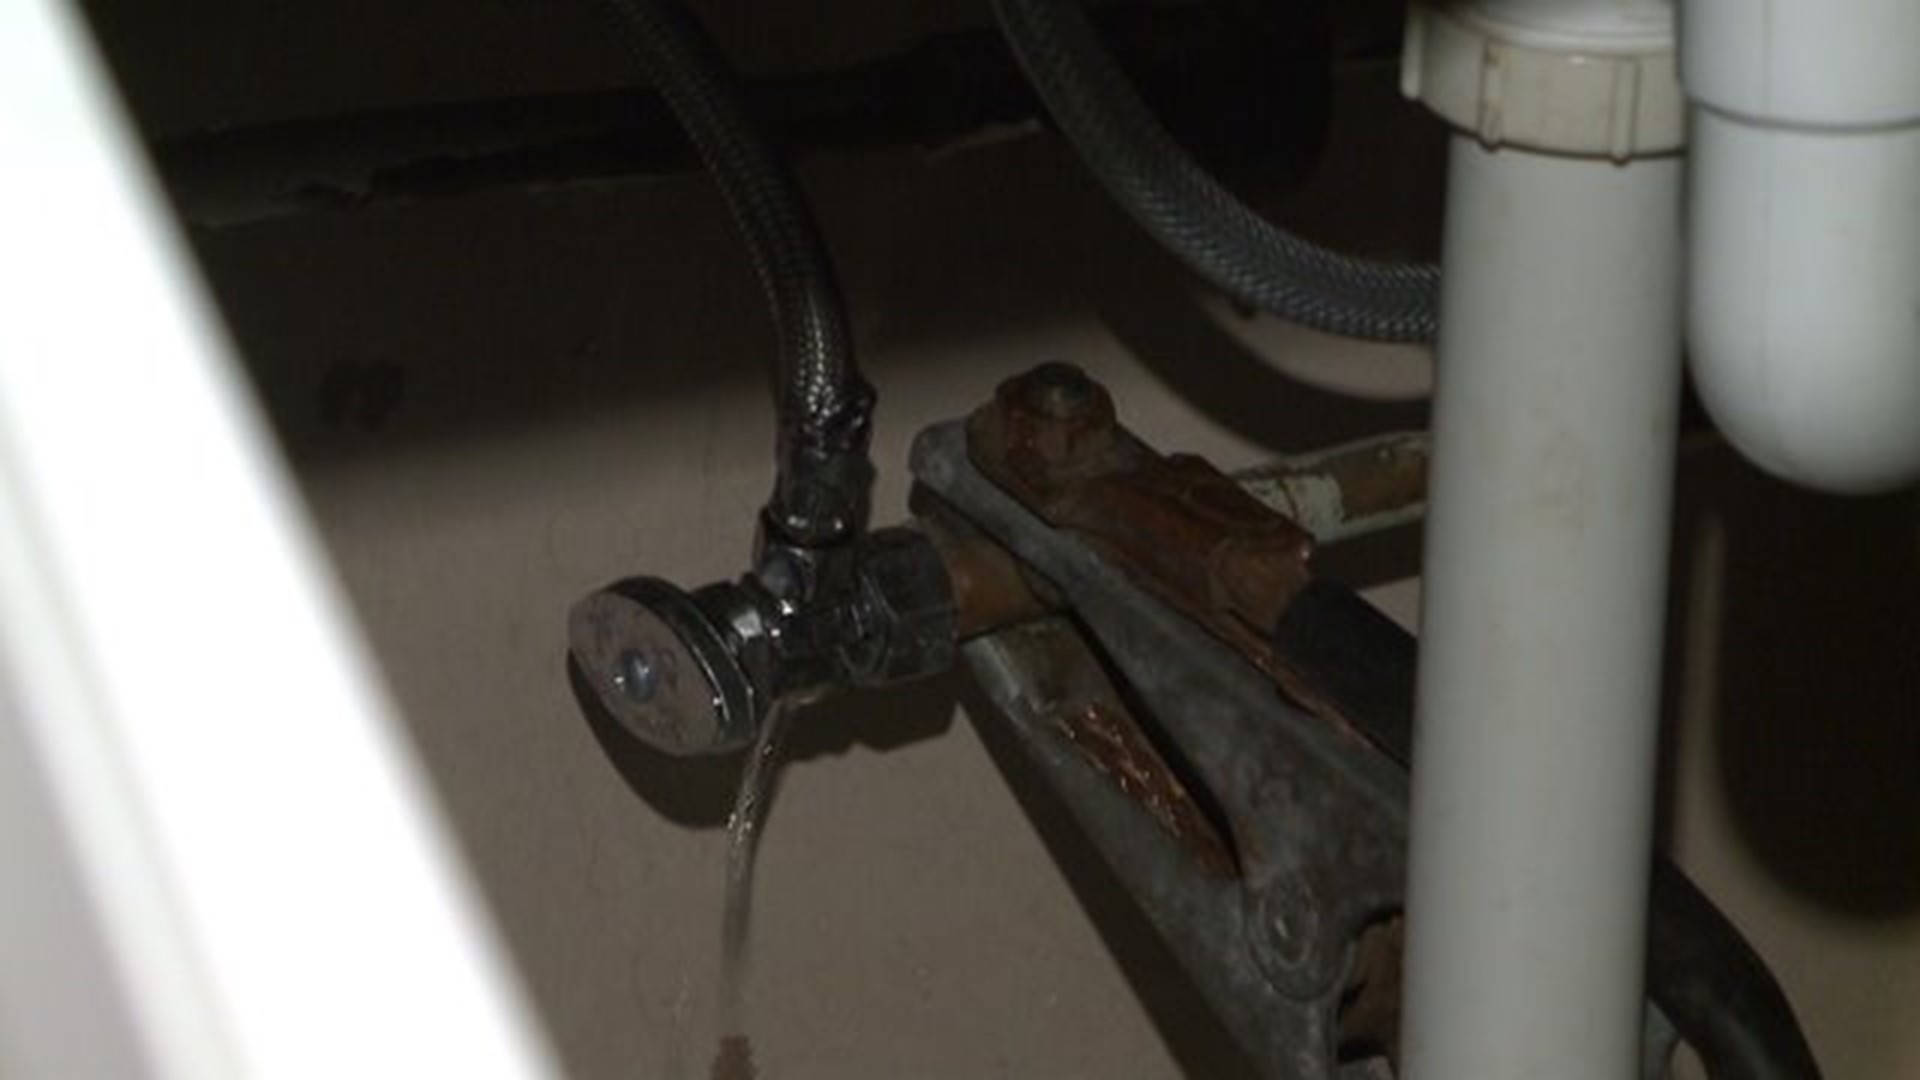 Be careful not to have your pipes burst during a burst of cold weather